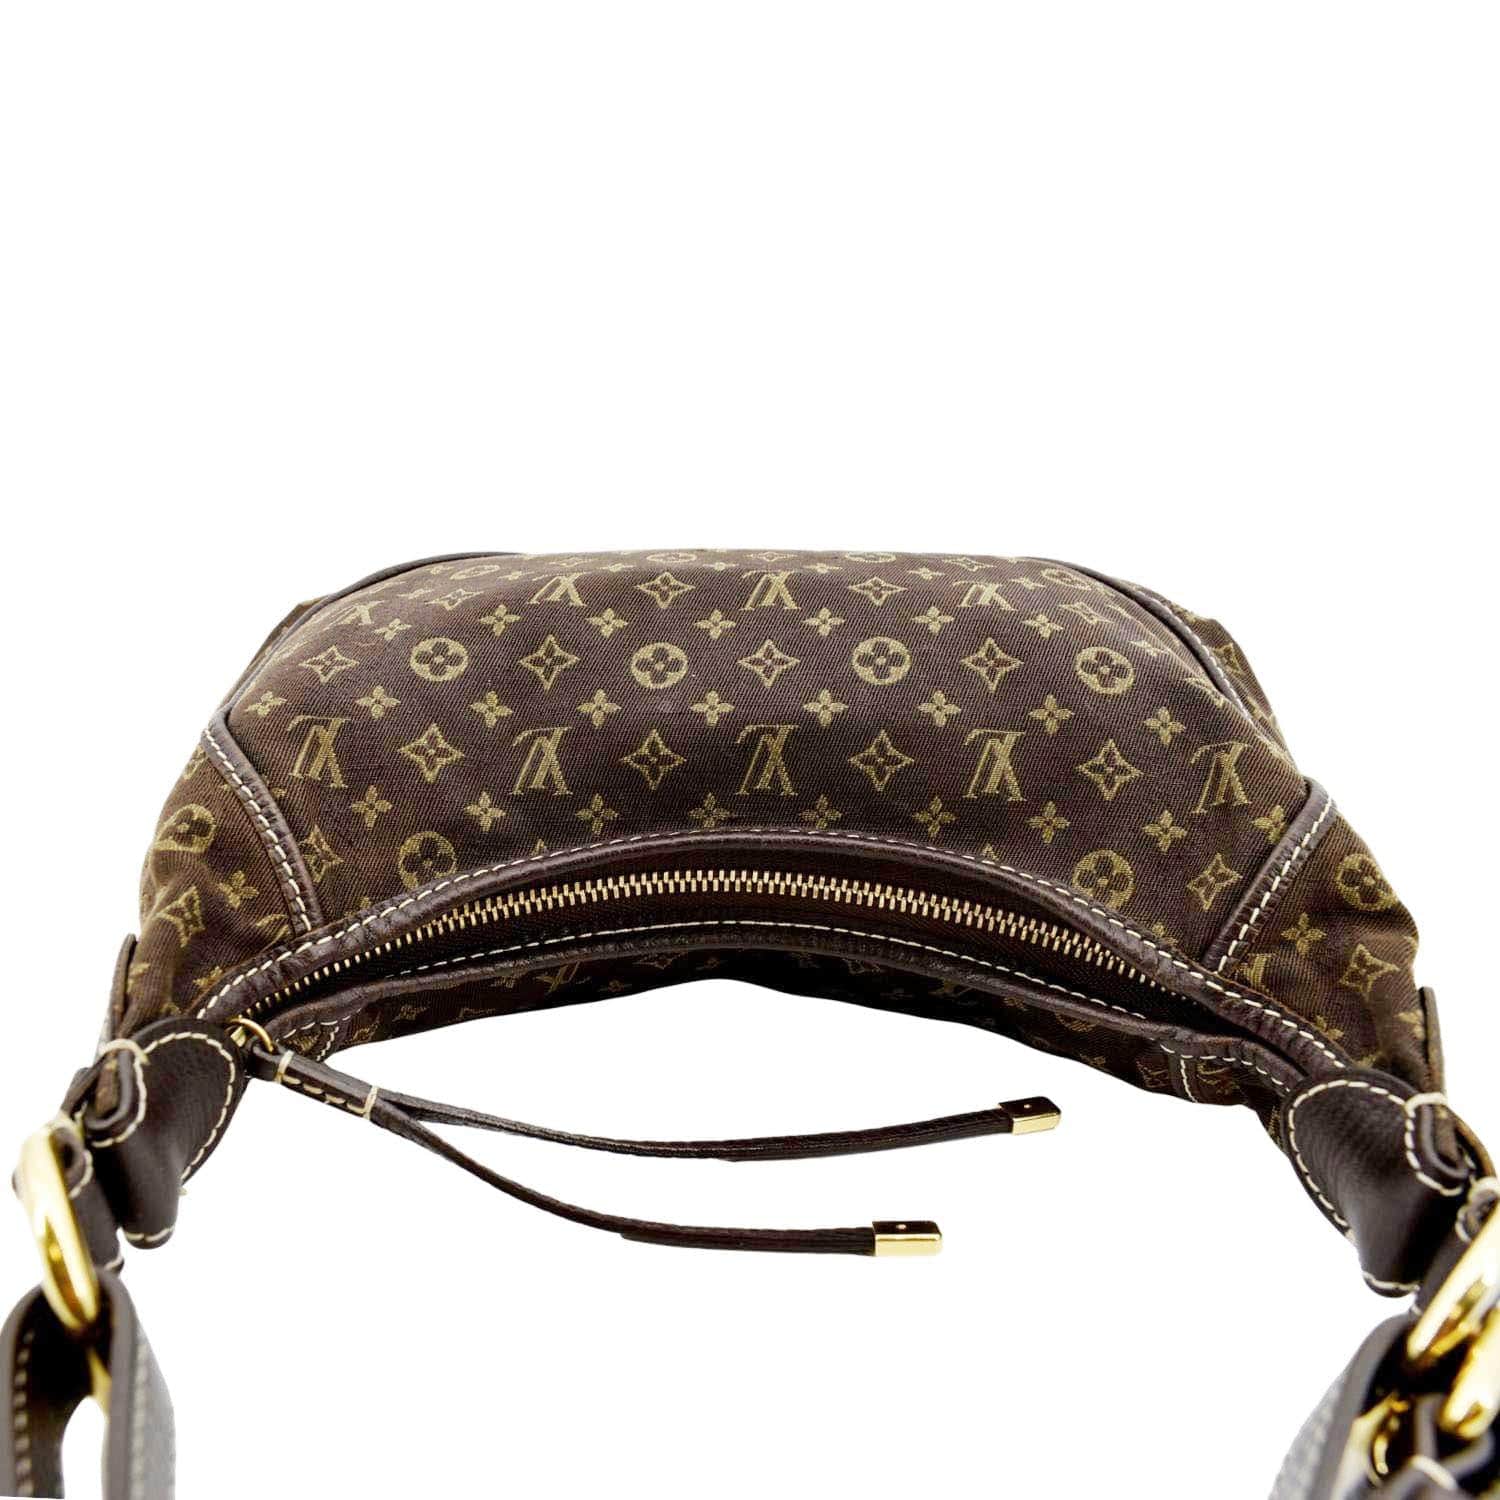 LOUIS VUITTON What's In My Bag, Mini Lin Speedy review!!! 